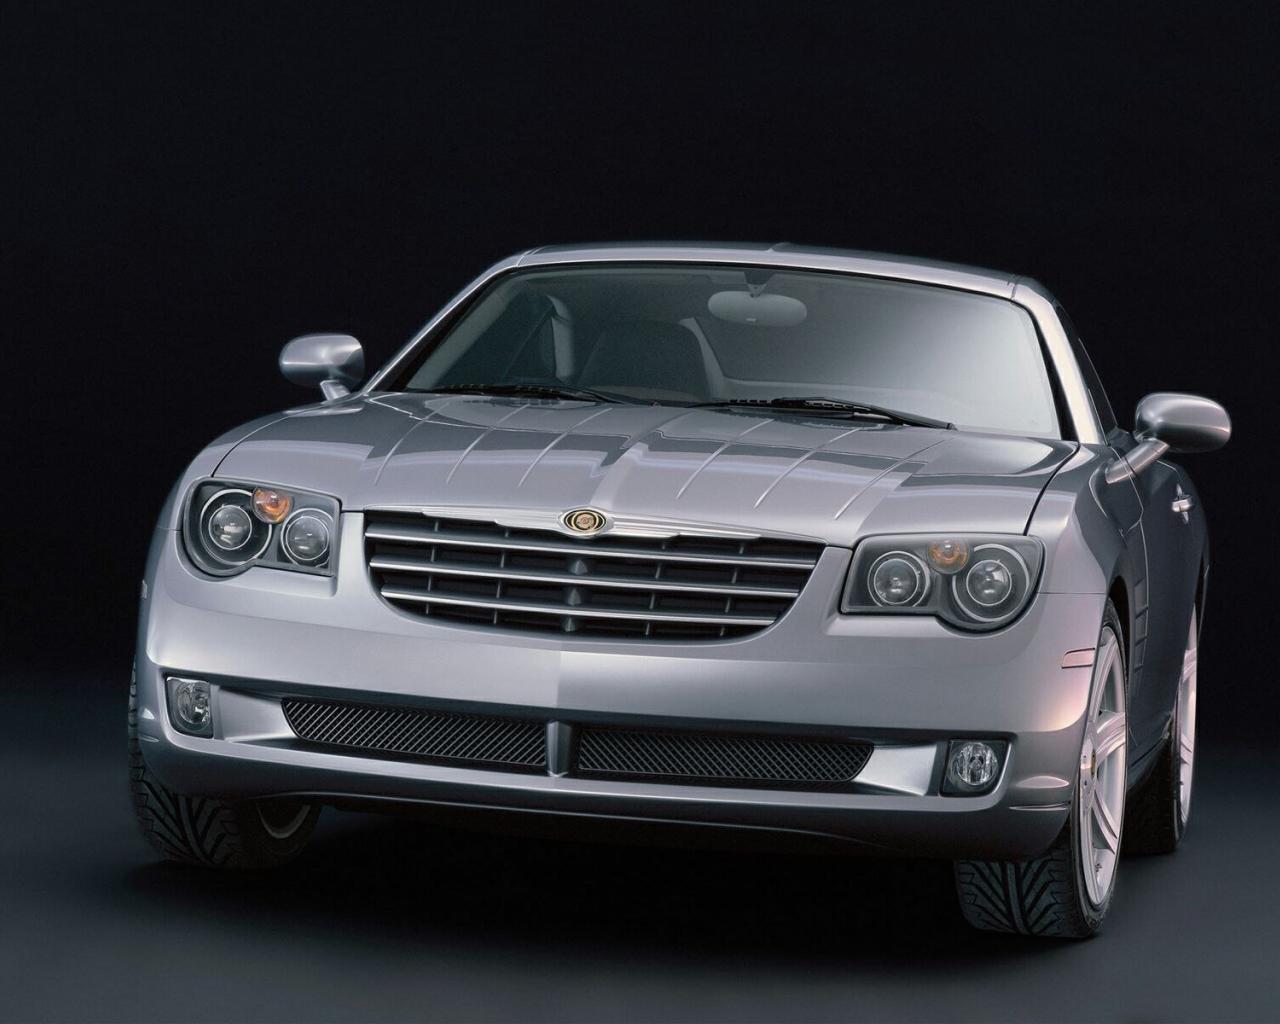 Chrysler Crossfire Front Normal HD Wallpaper Hq